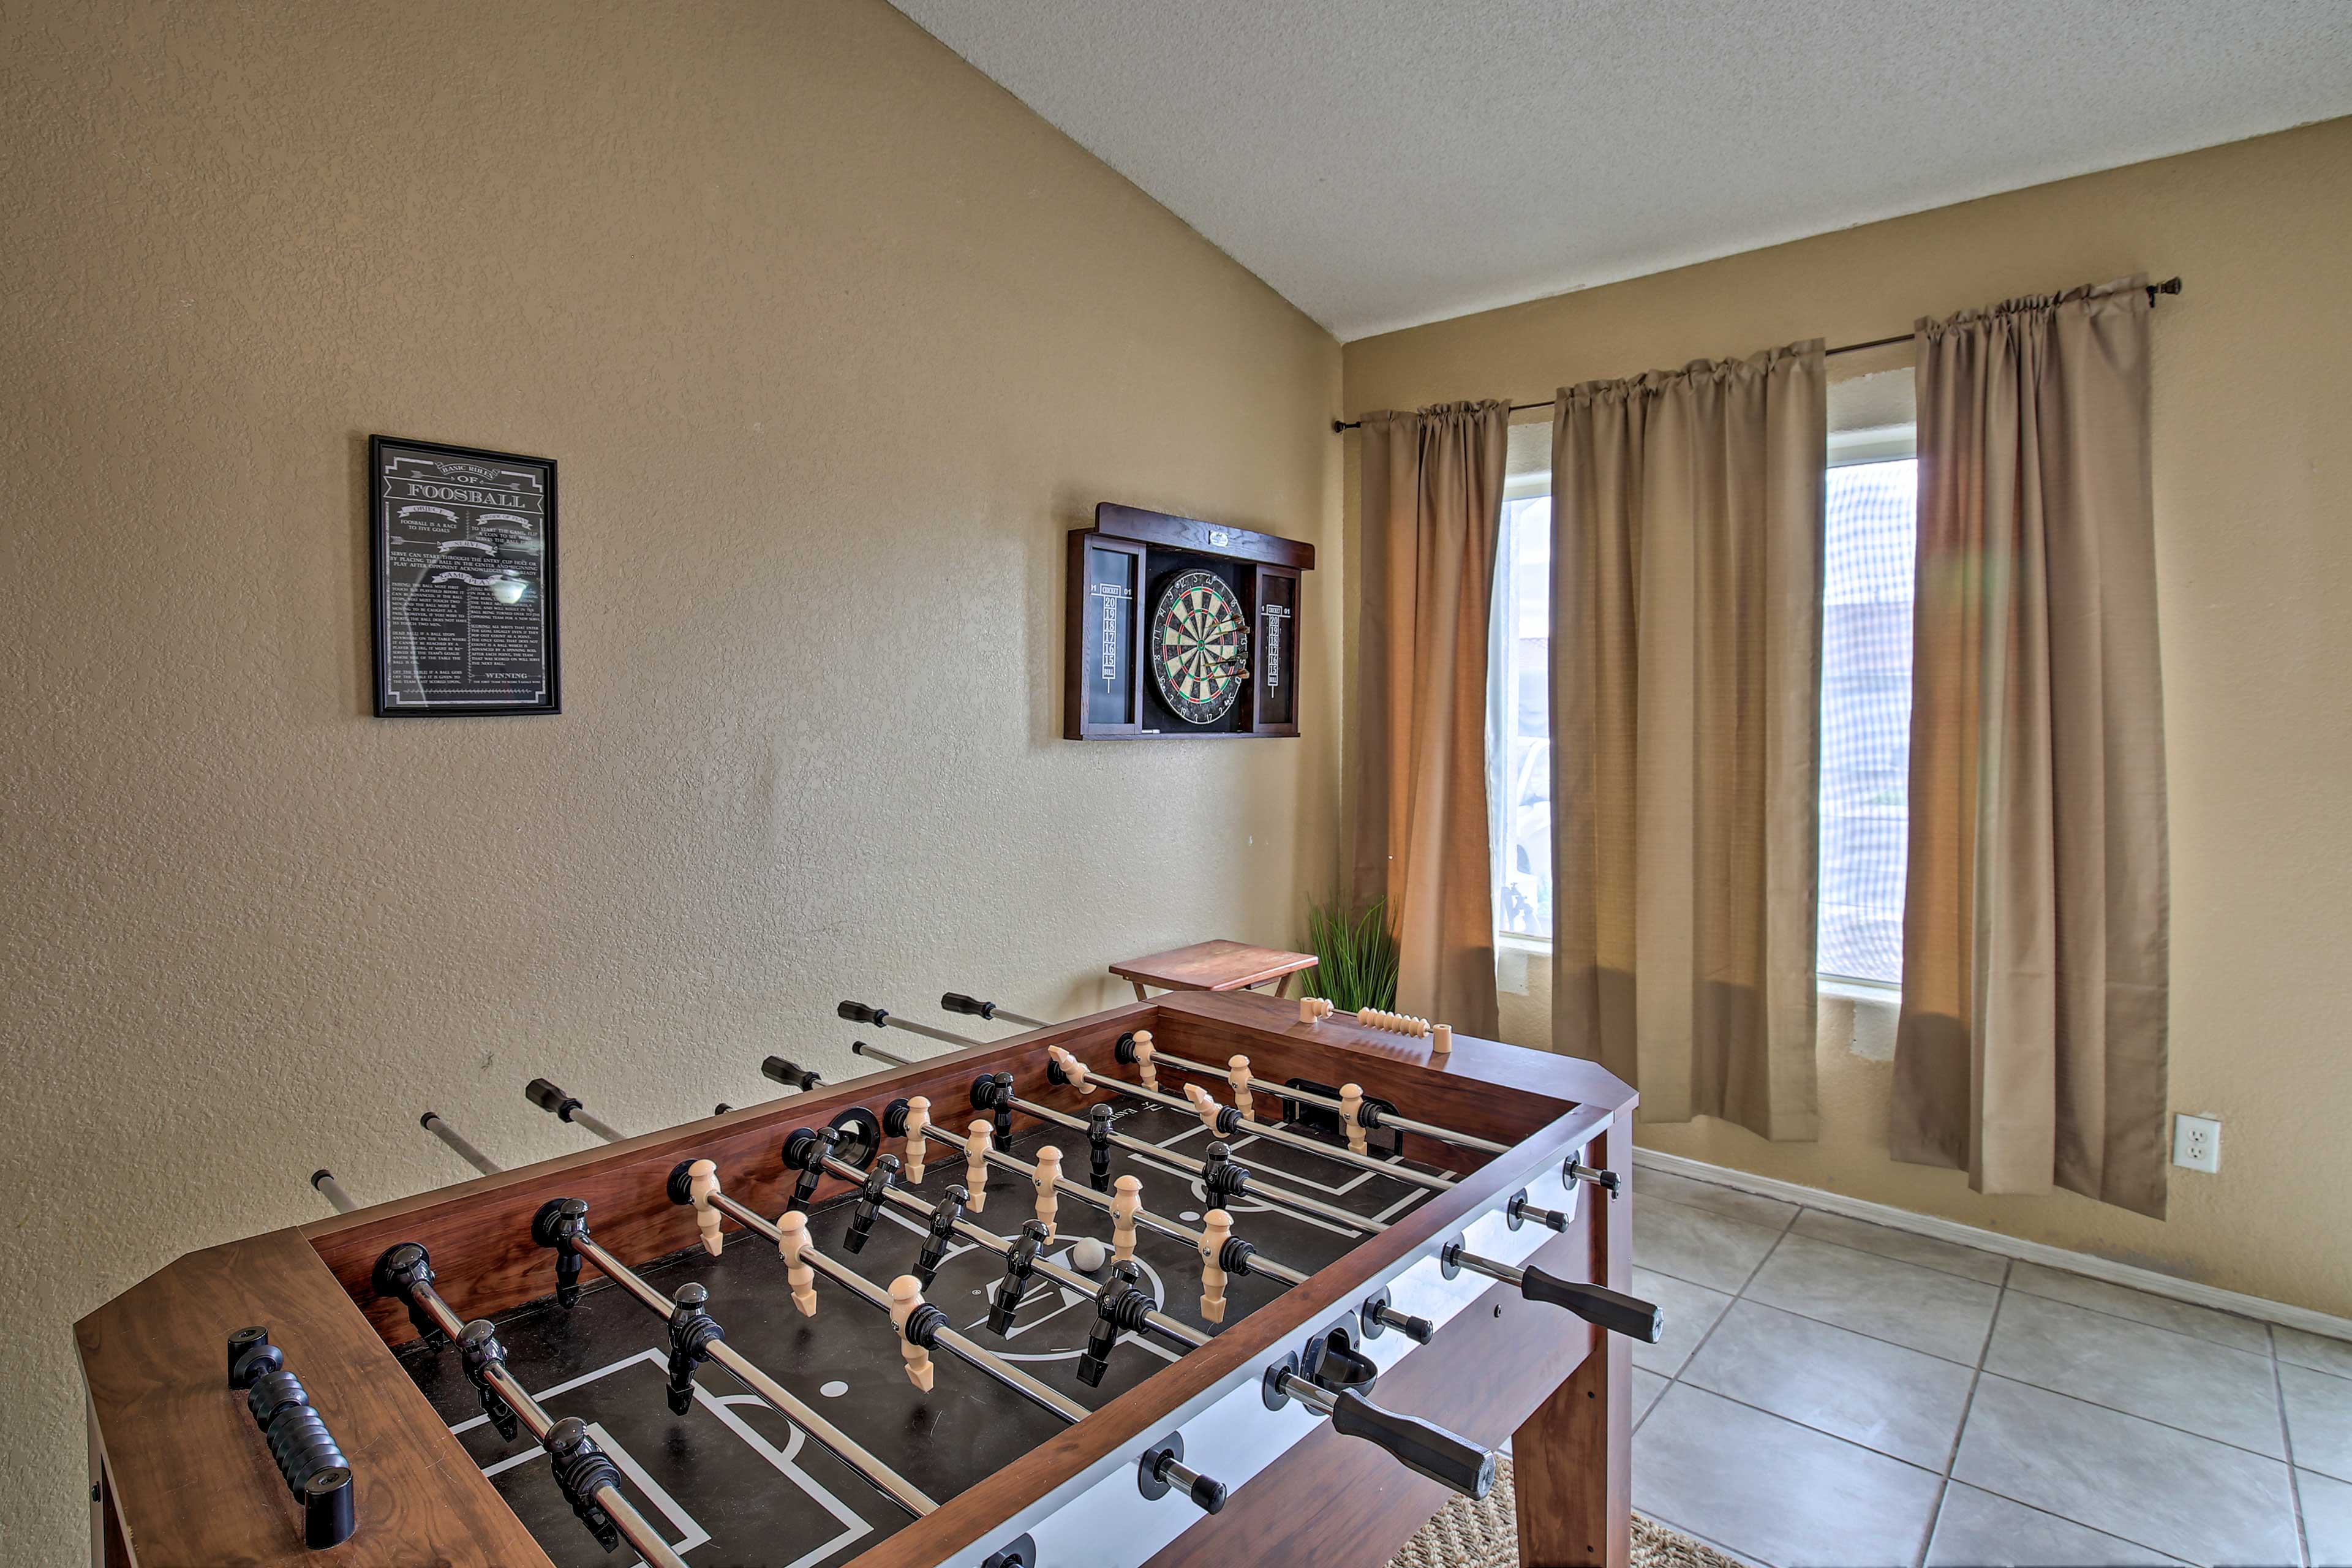 Challenge your travel companions to darts and foosball.